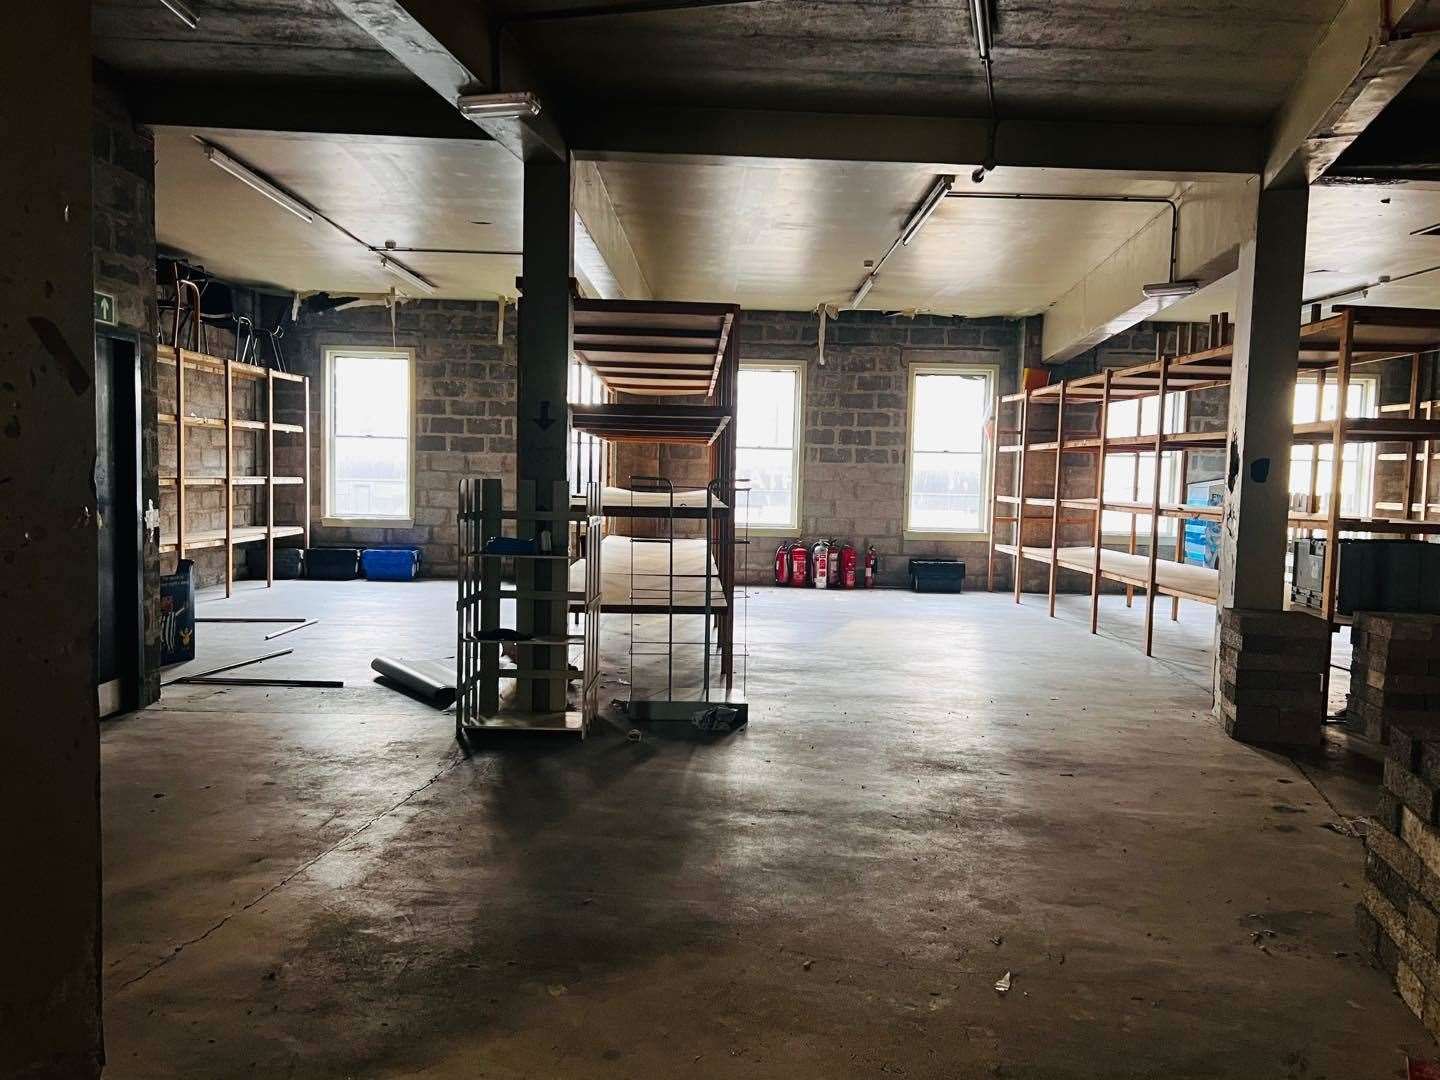 View inside the former Ponden Home Interiors building where Playback games bar and restaurant could be created. Picture: Inverness BID